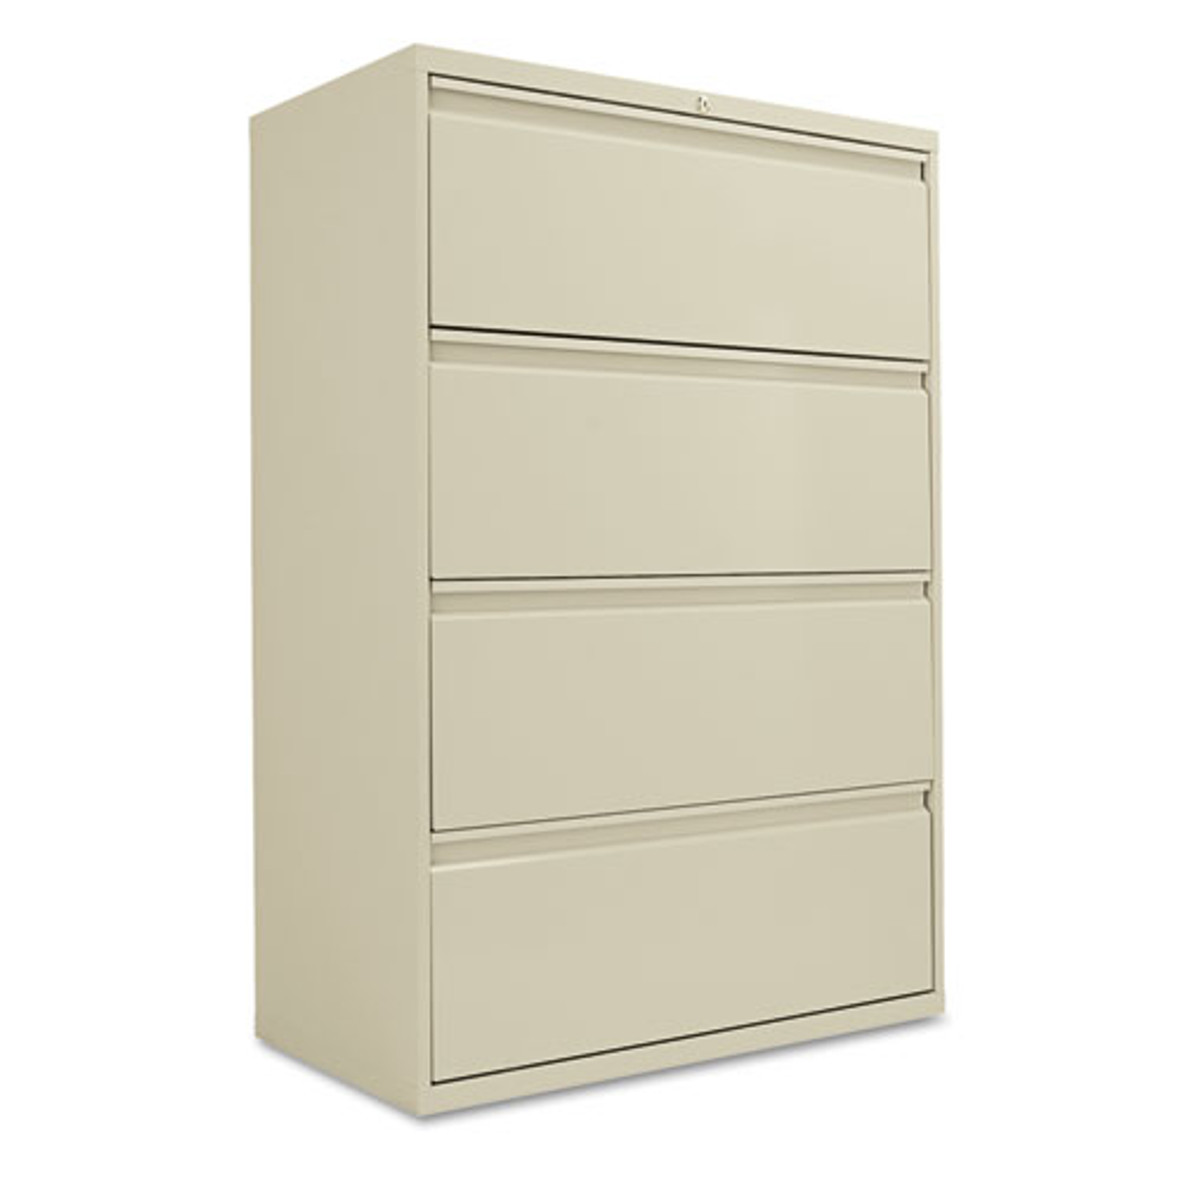 Lateral File, 4 Legal/letter-size File Drawers, Putty, 36" X 18" X 52.5"